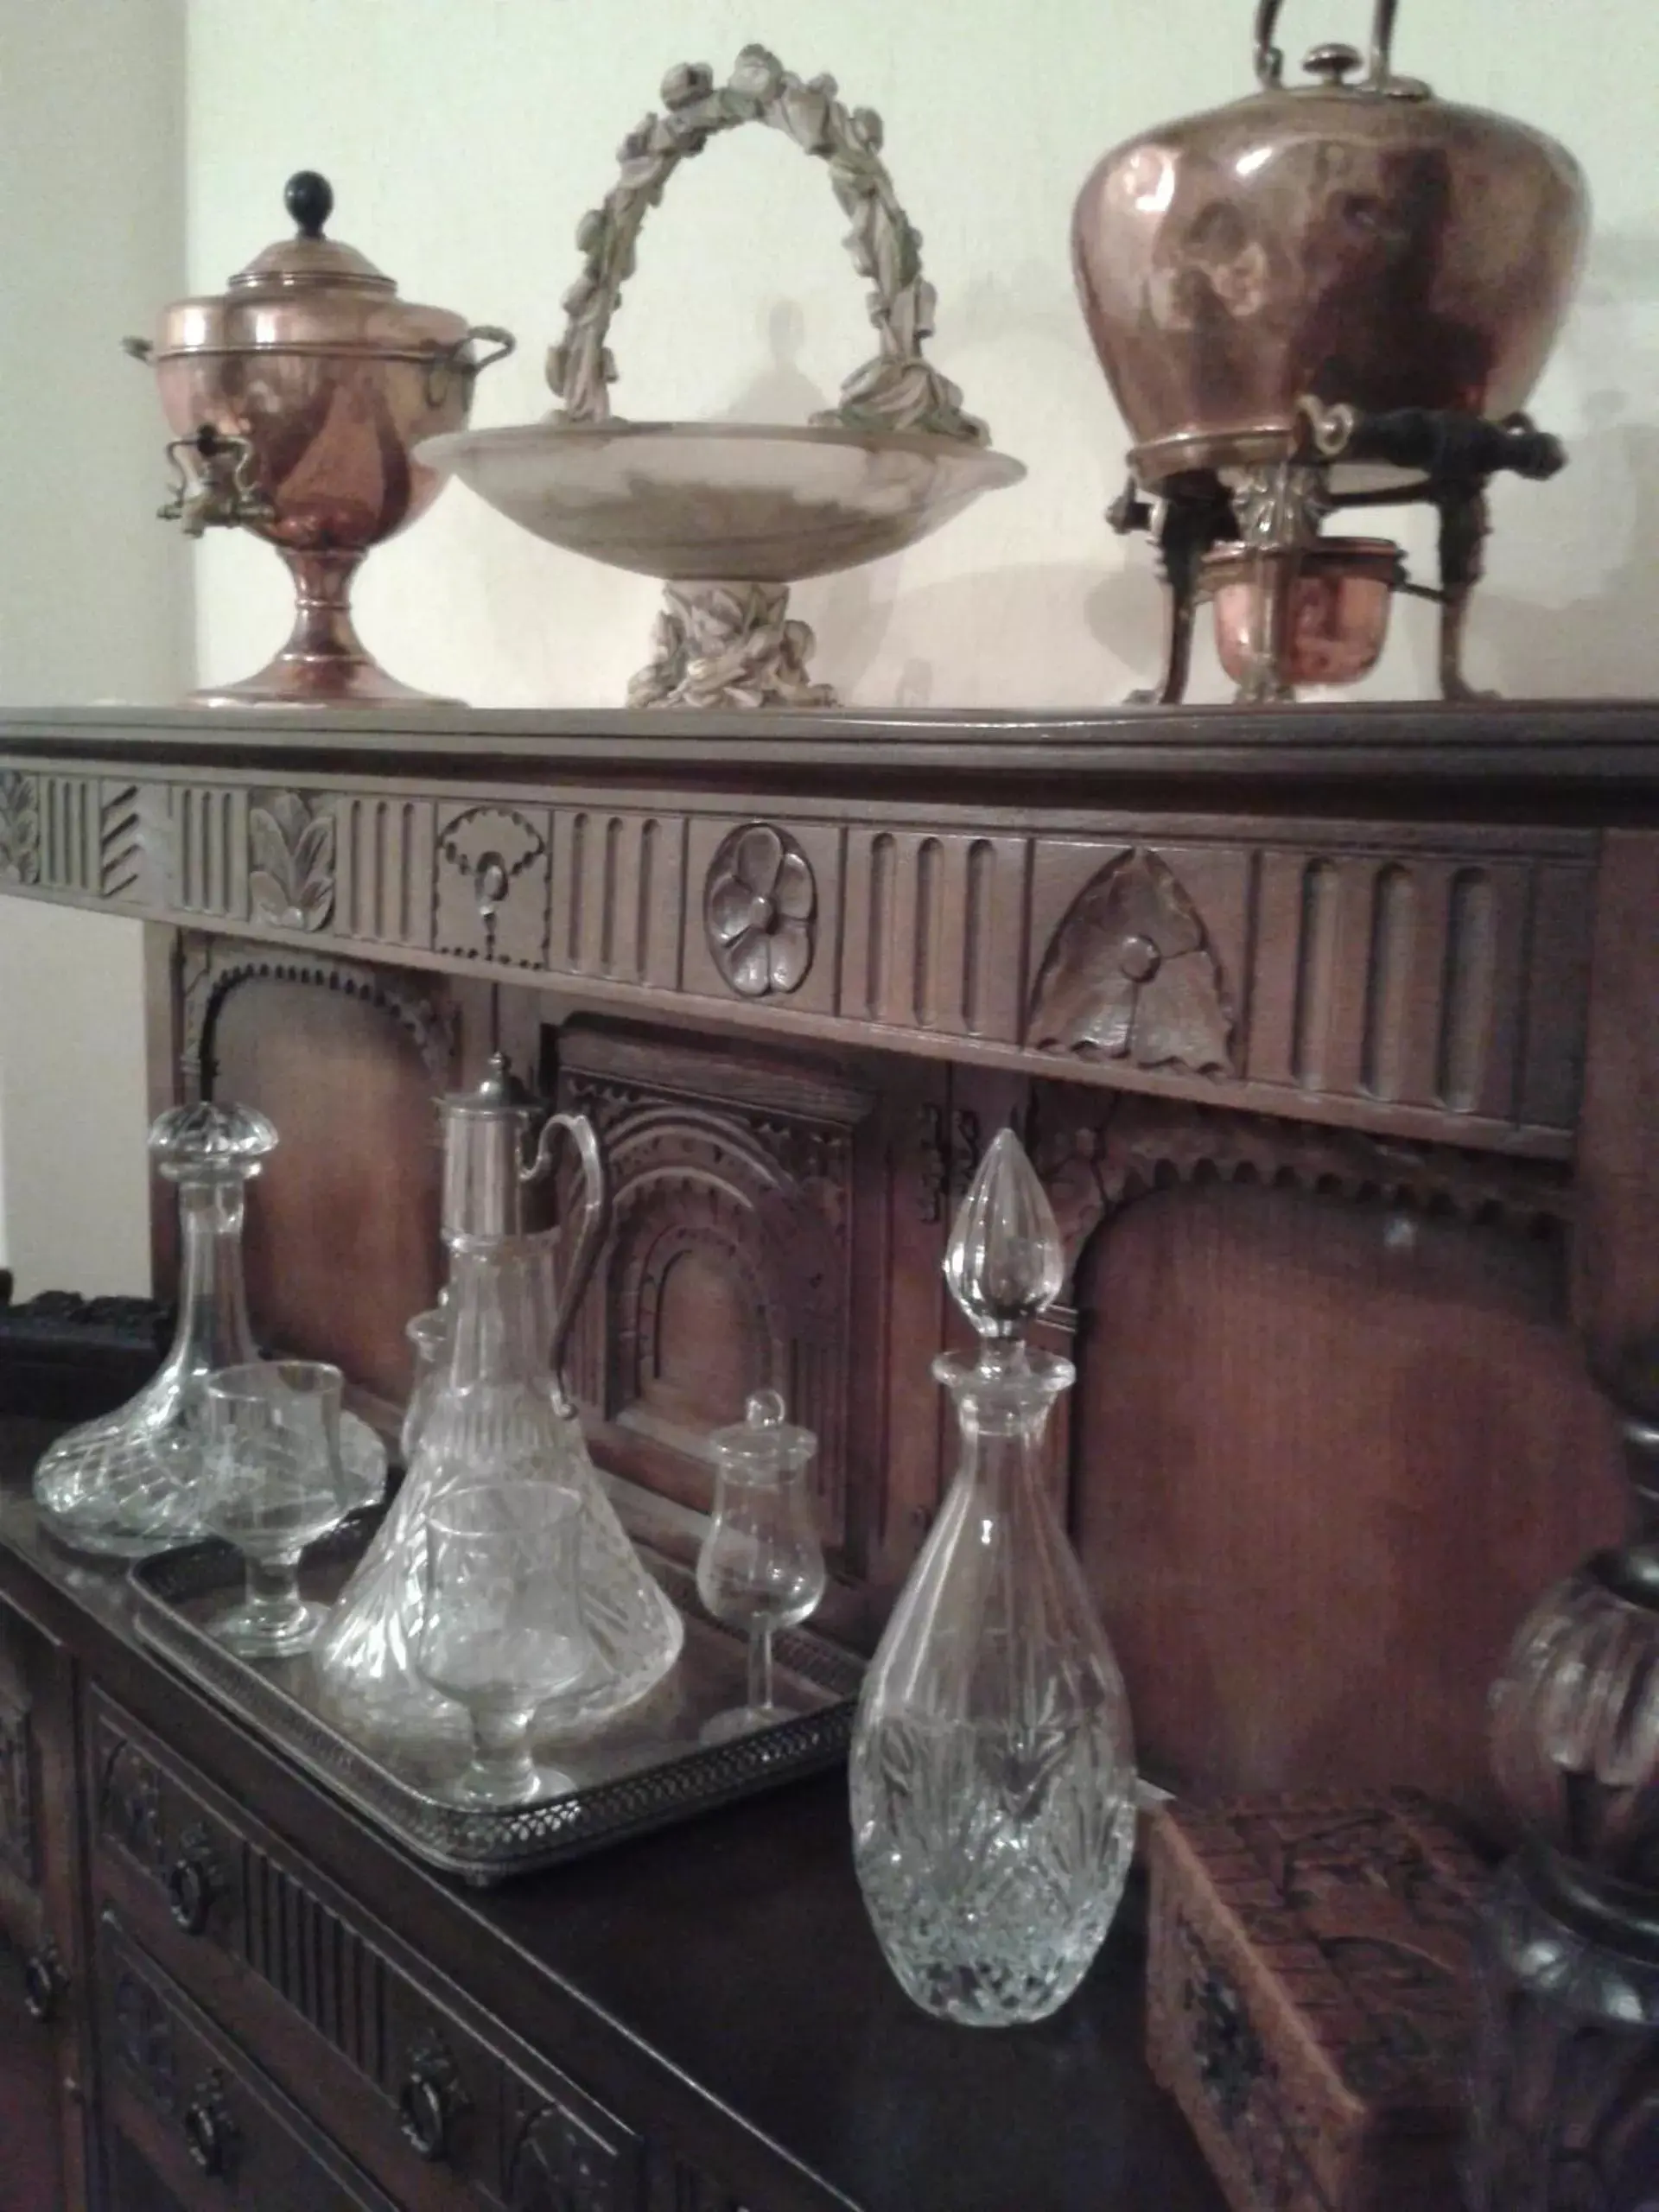 Decorative detail, Drinks in The Post House